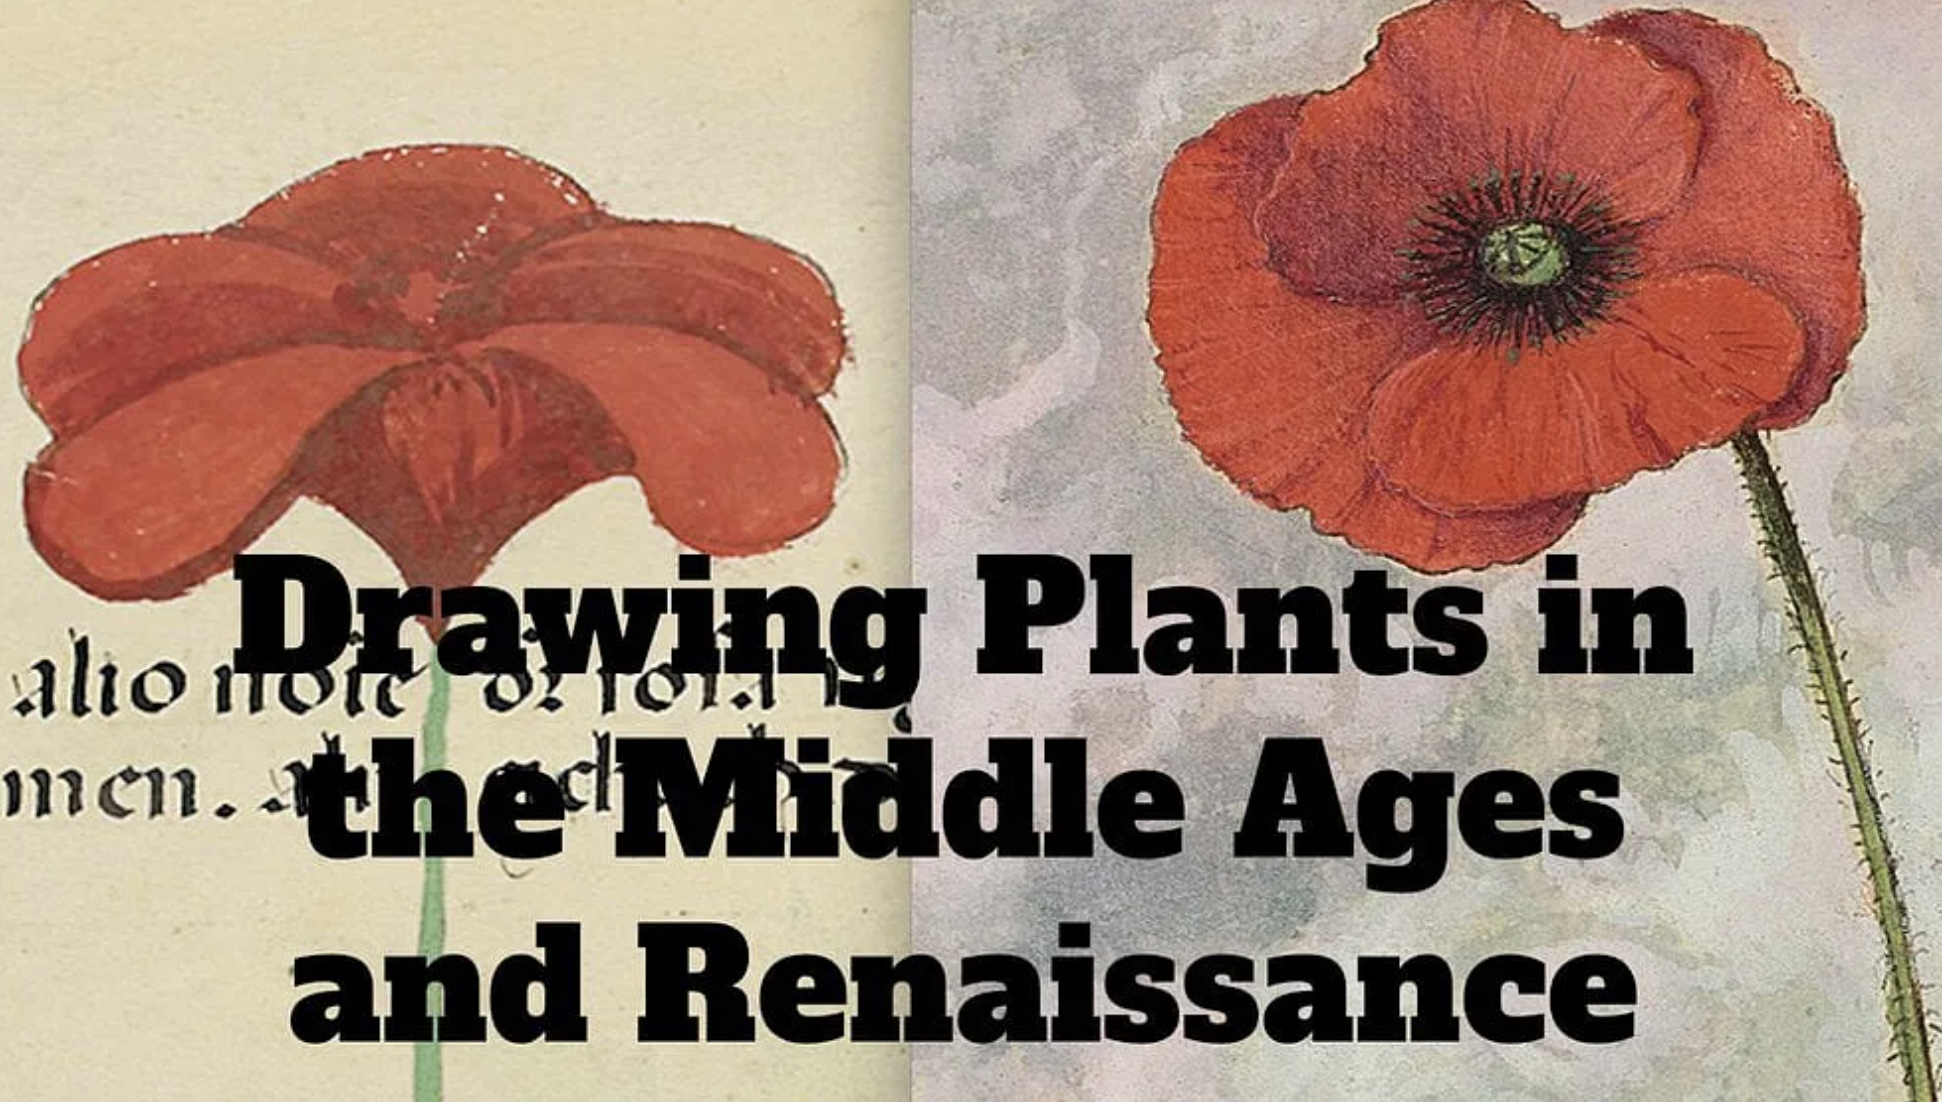 How to draw plants in the Middle Ages and Renaissance